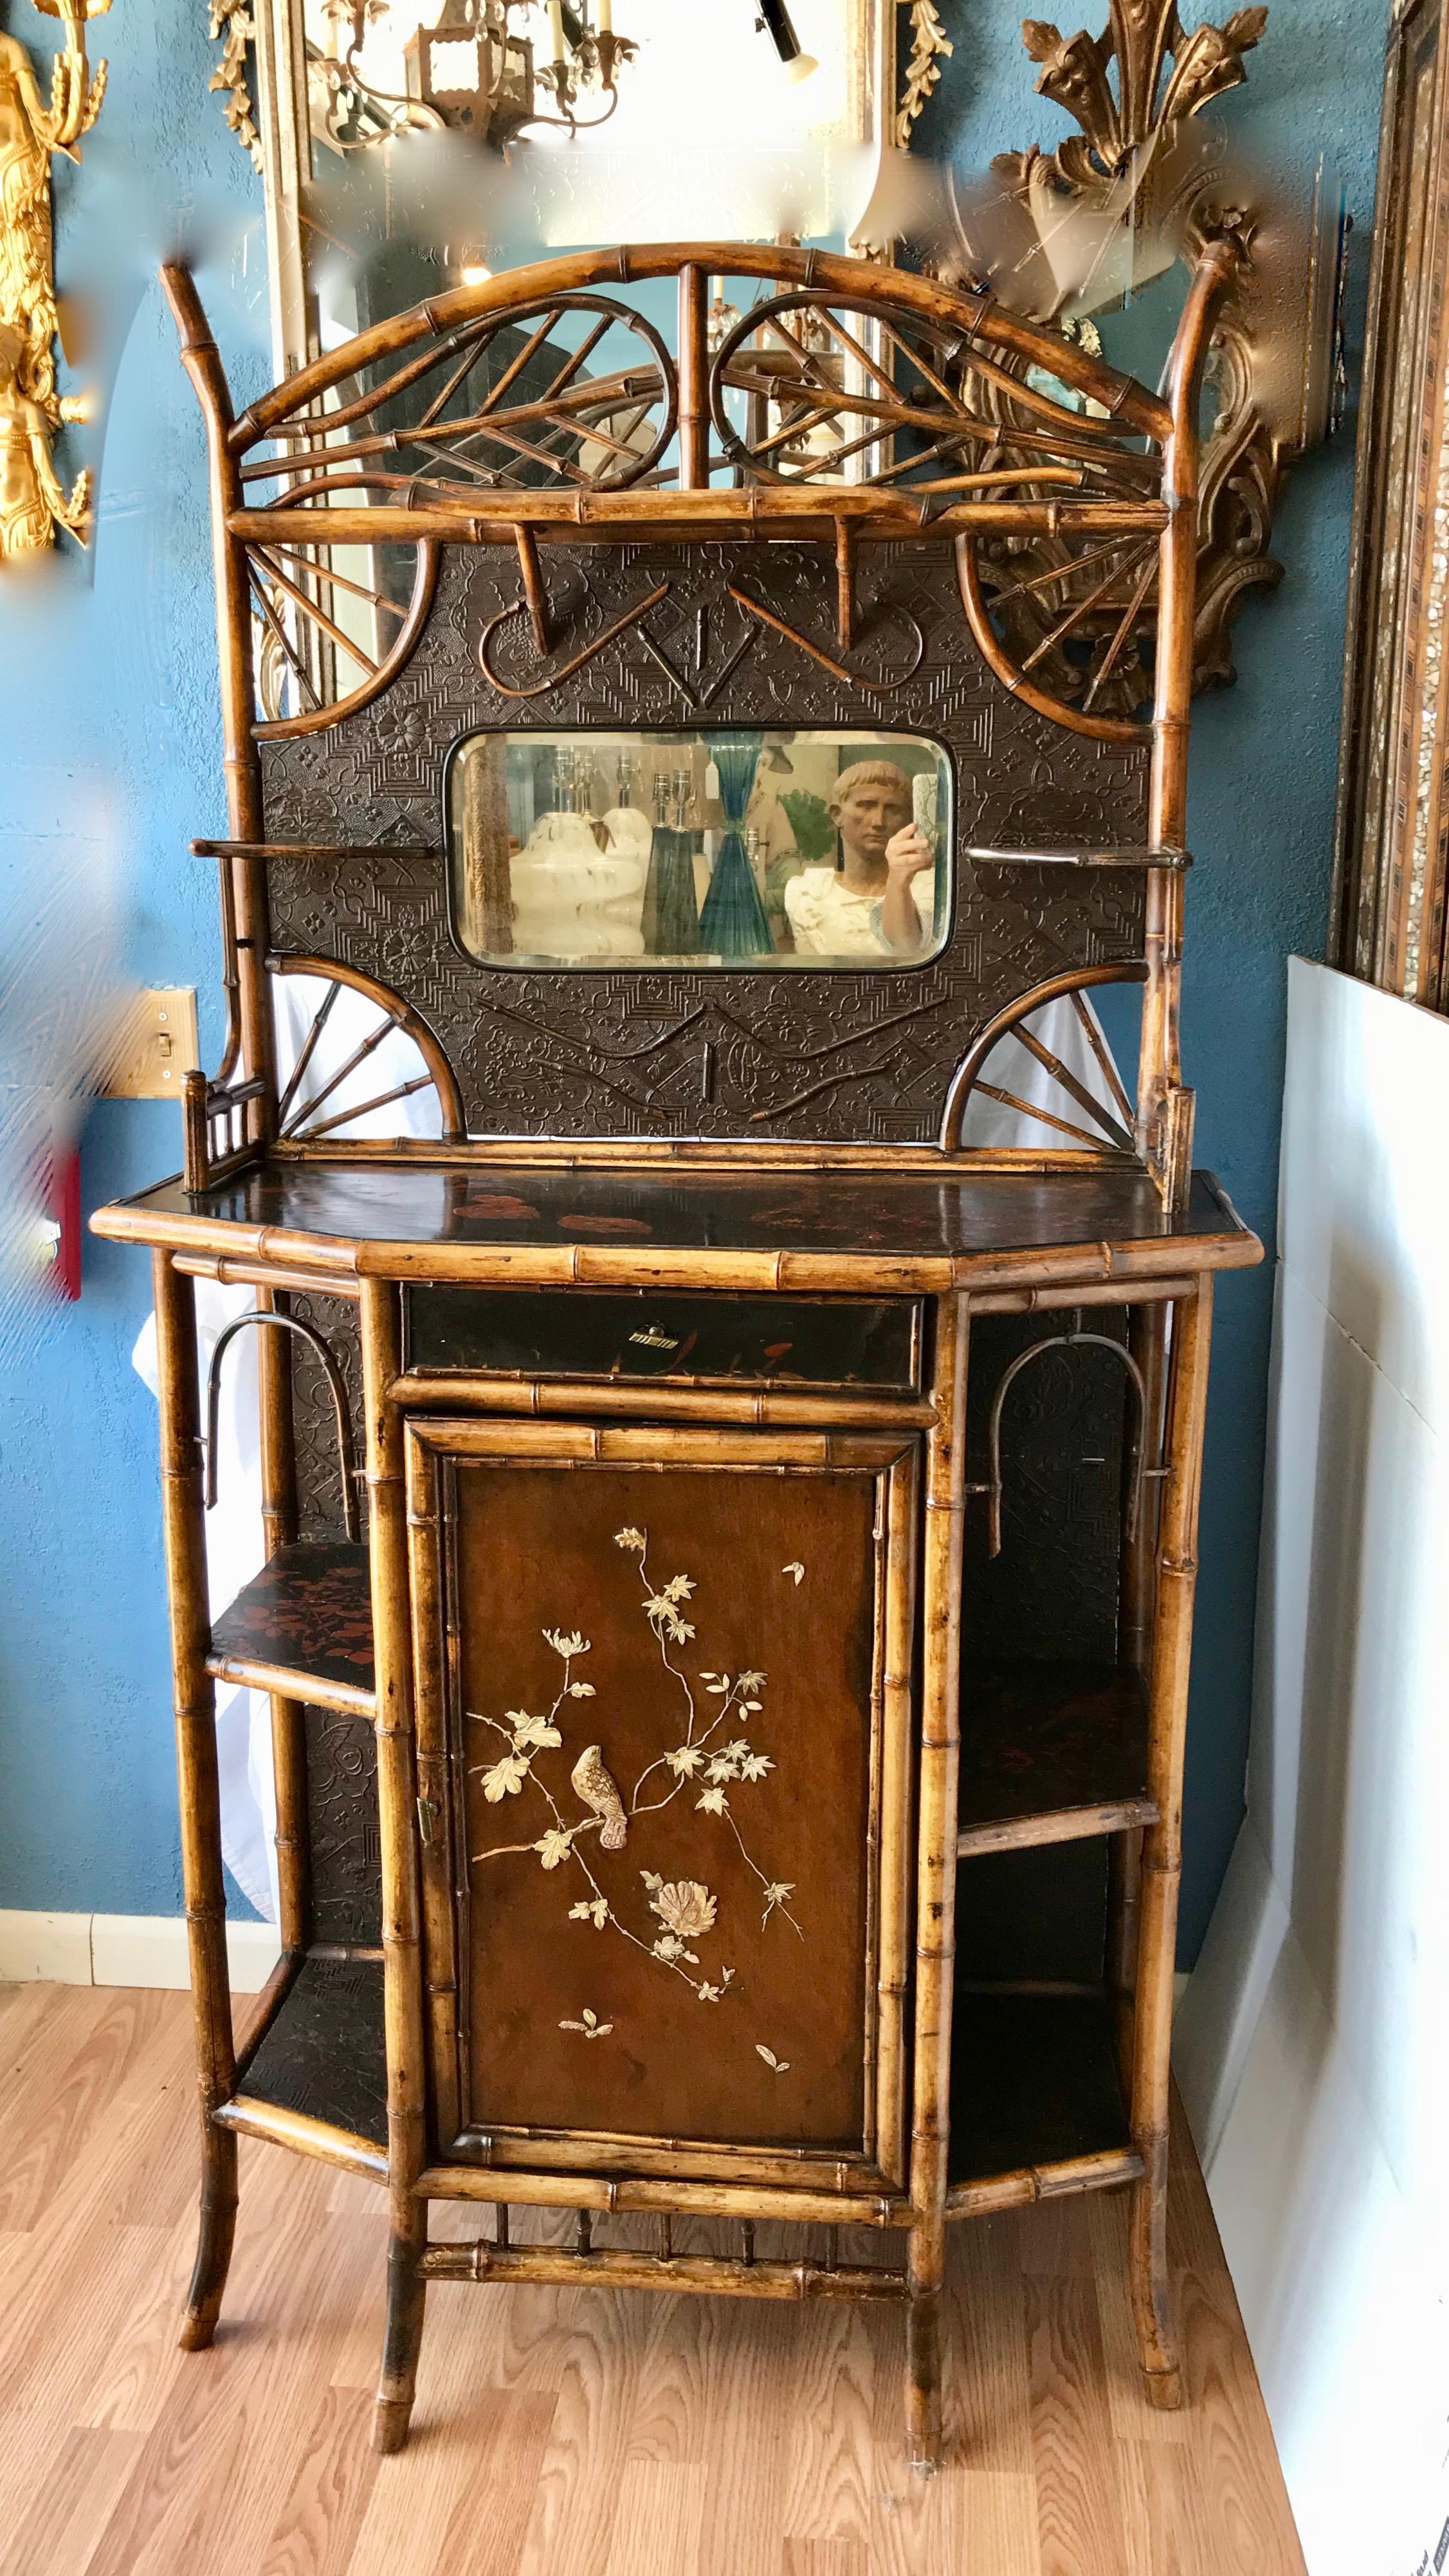 A superb example - finely detailed. Magnificently proportioned.
The cabinet is designed with an etagere top that is richly embellished.
The front door is appointed a bird foliage. An outstanding creatively 
Appointed piece. Superior quality.